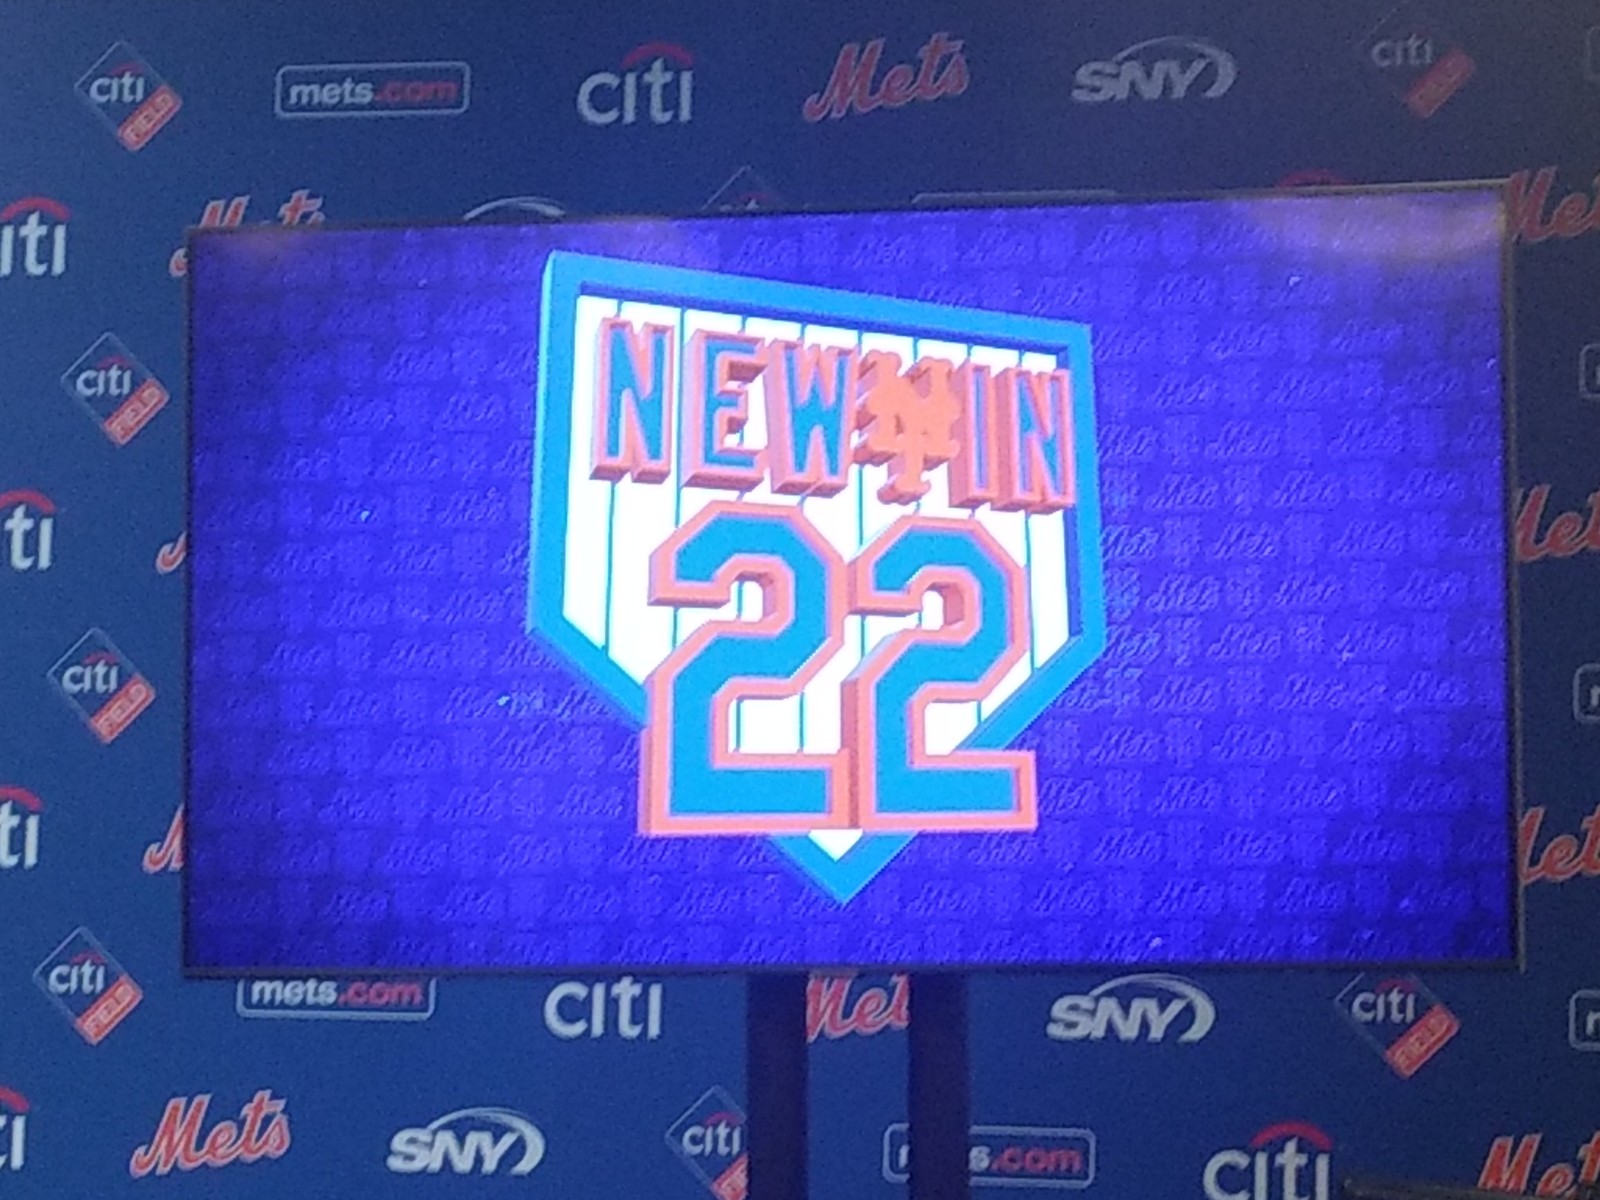 A new exhibit about the Mets is opening at Citi Field